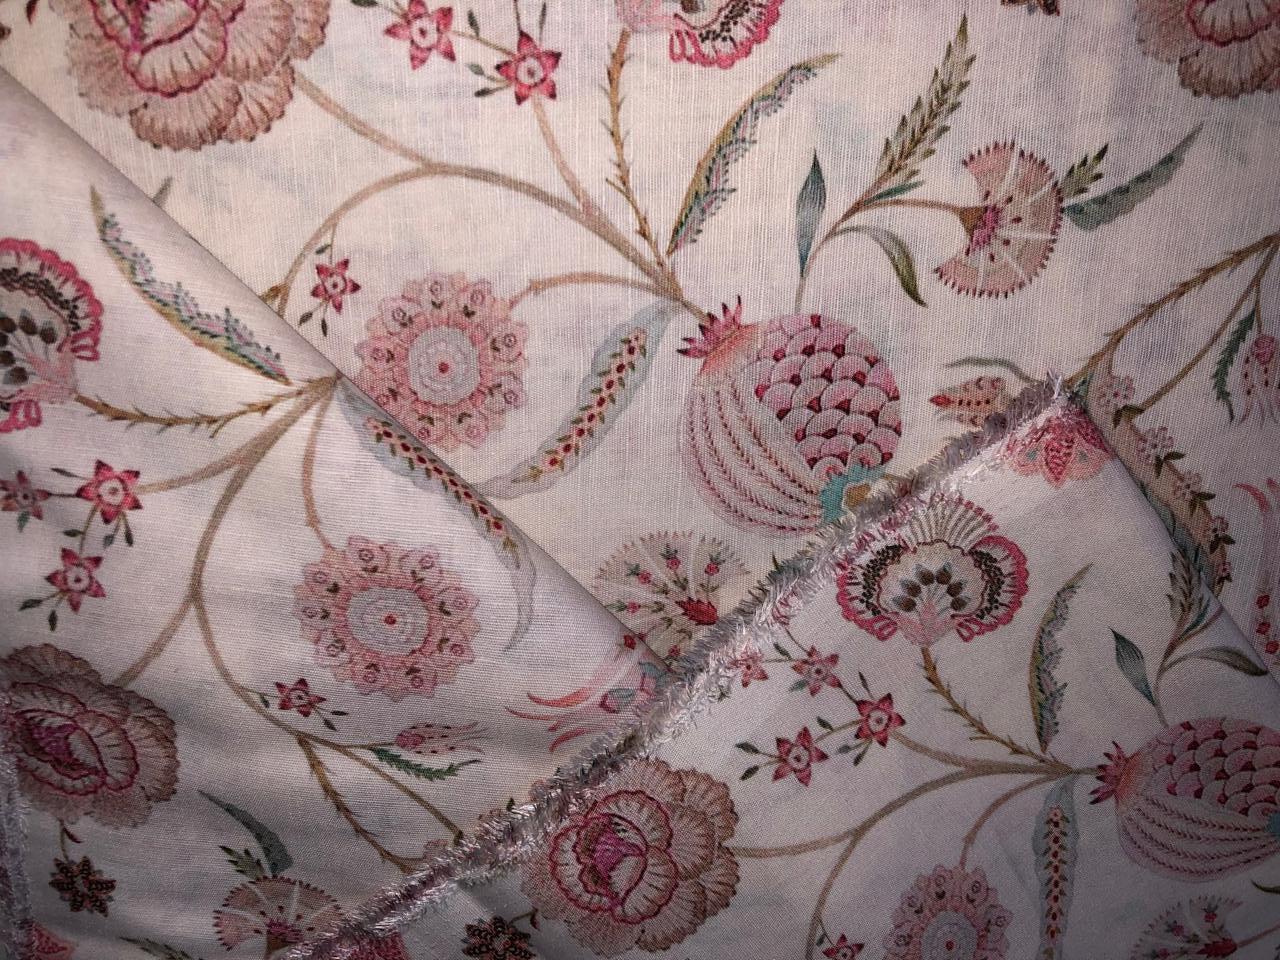 100% linen FLORAL digital print fabric 44" wide available in 2 colors grey/pink and ivory/pink  [15957/15958]